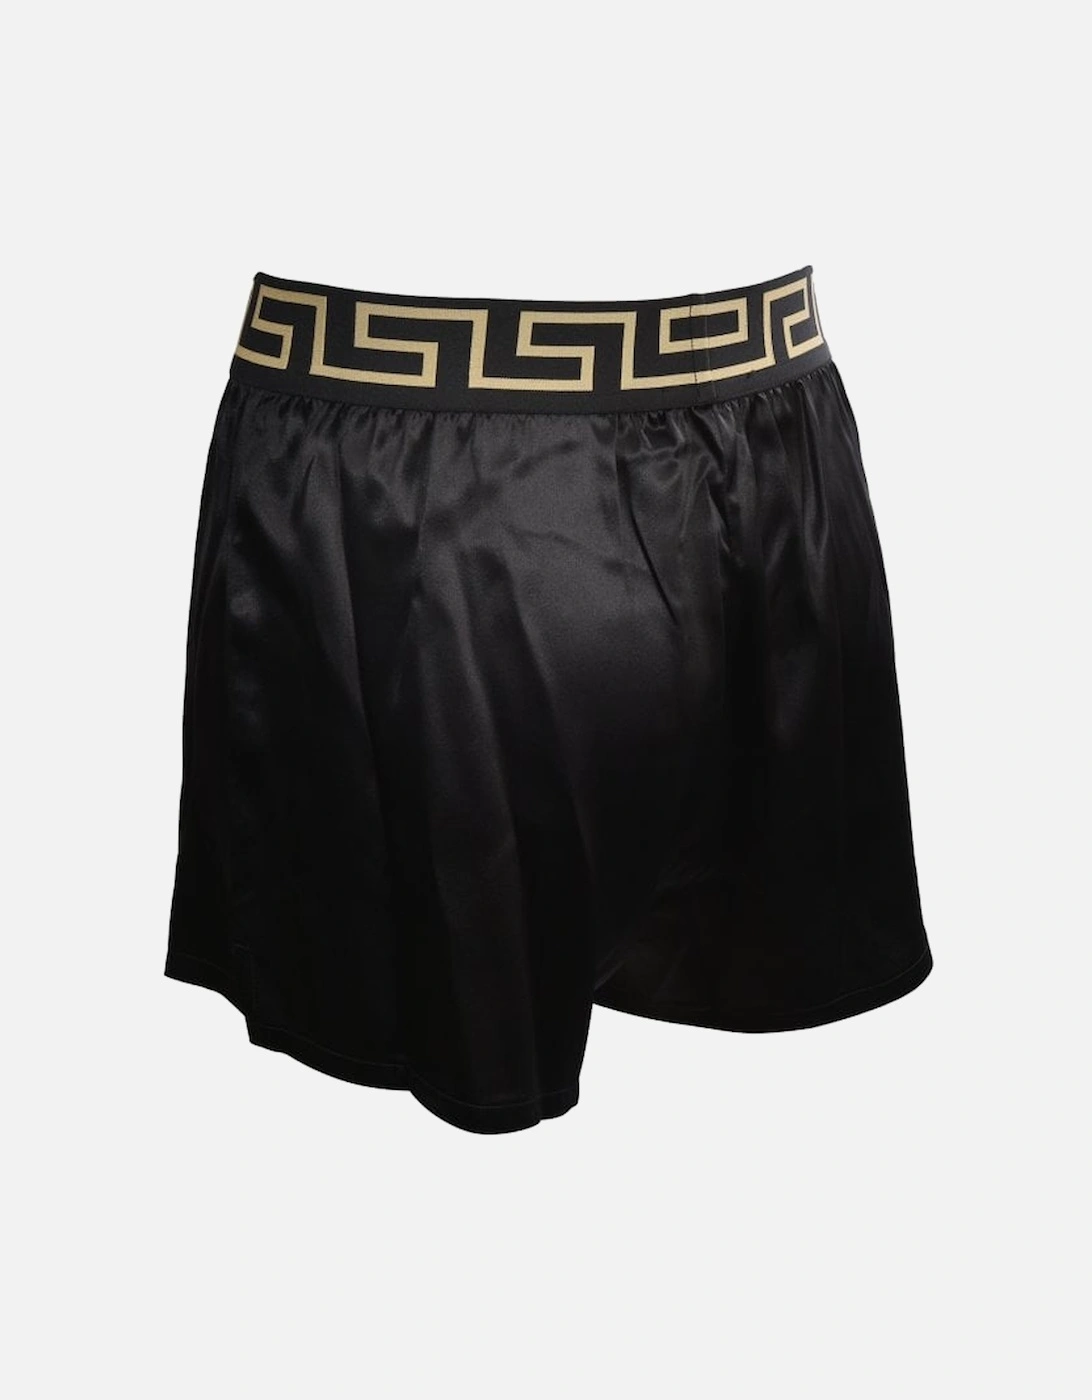 Iconic Button-Front Silk Boxer Short, Black/gold